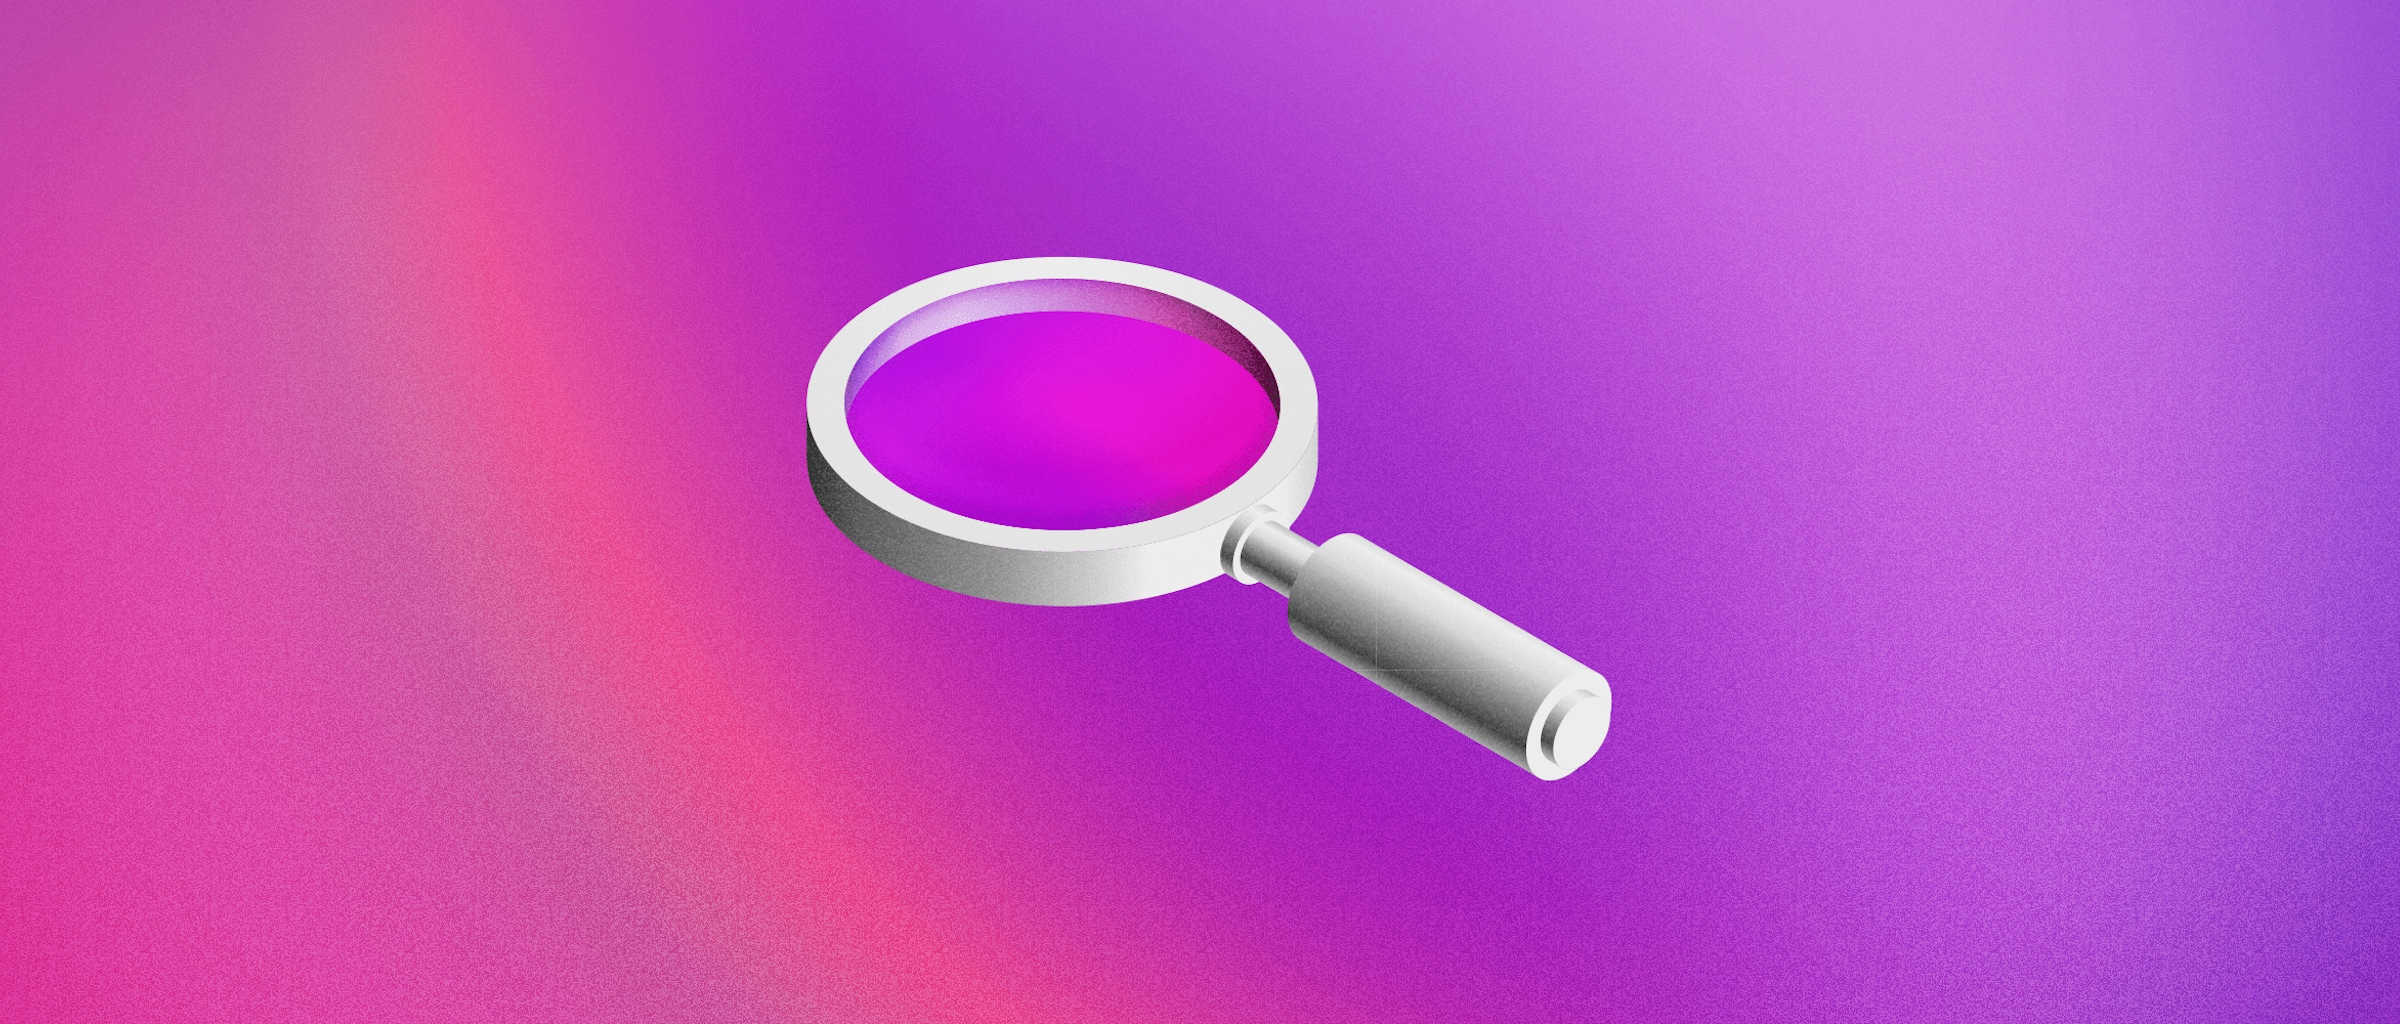 An illustration showing a black and white magnifying glass in 3D, on a purple background